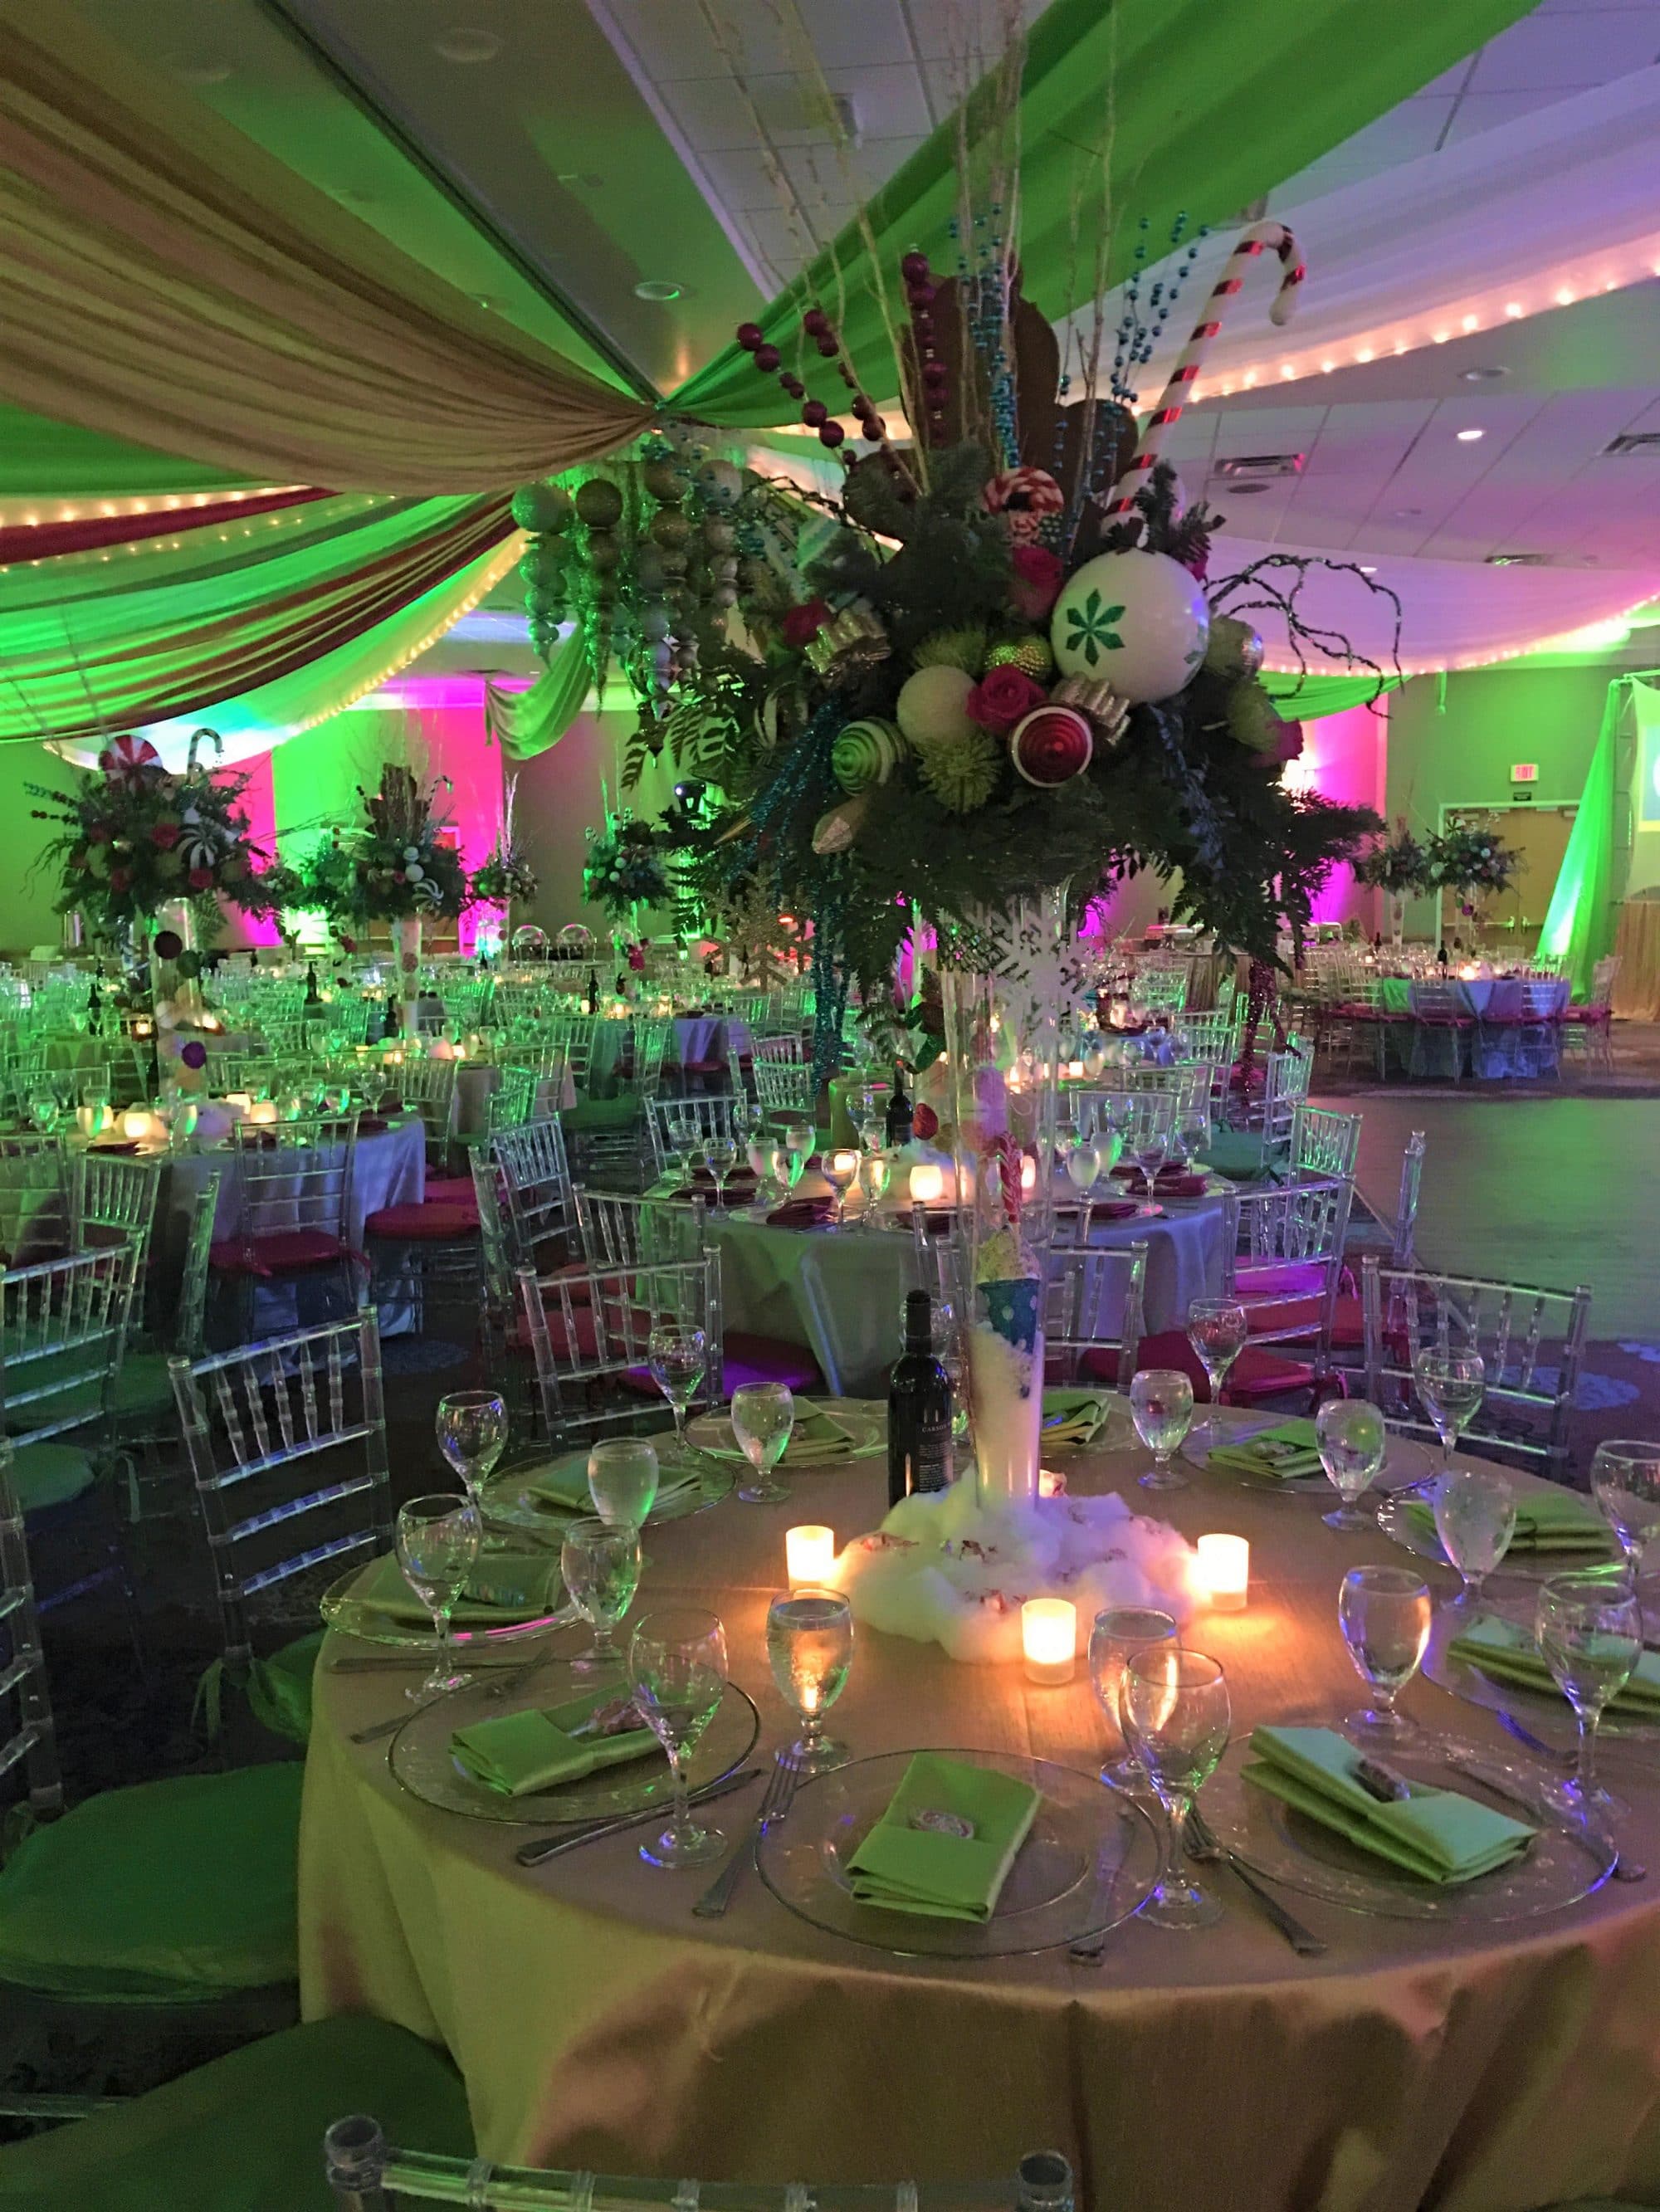 Florida Hotel and Convention Center - Christmas reception with tall centerpieces and green and red ceiling drapes